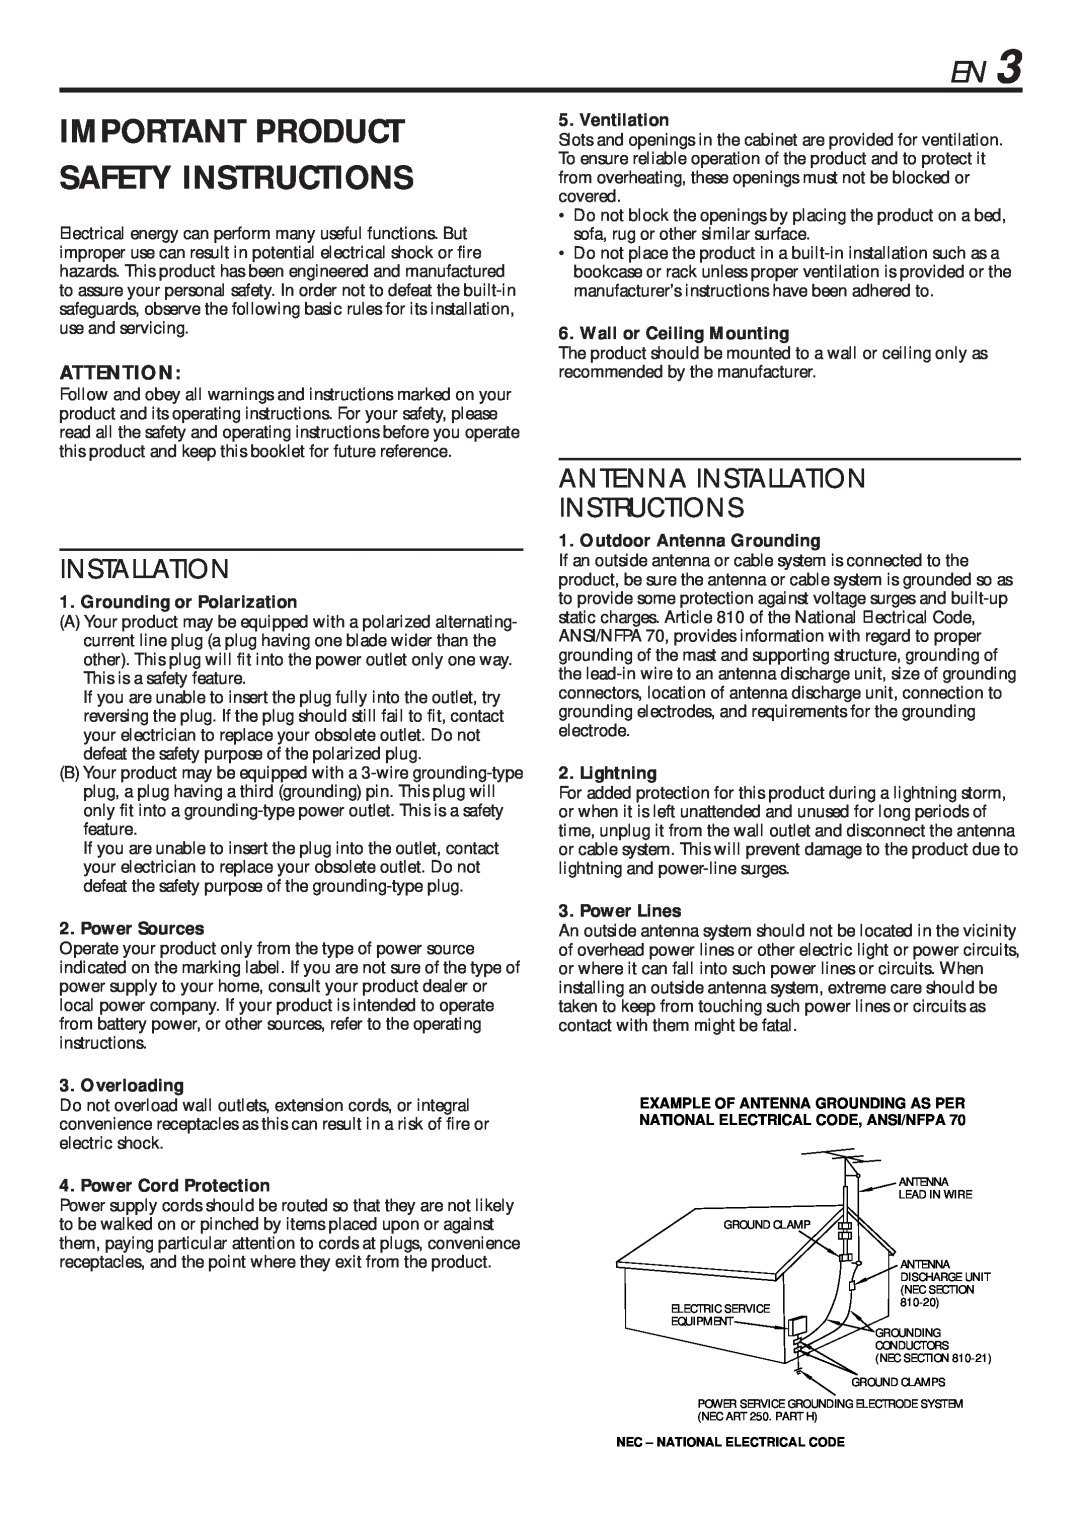 JVC HR-VP682U manual Antenna Installation Instructions, Important Product Safety Instructions 